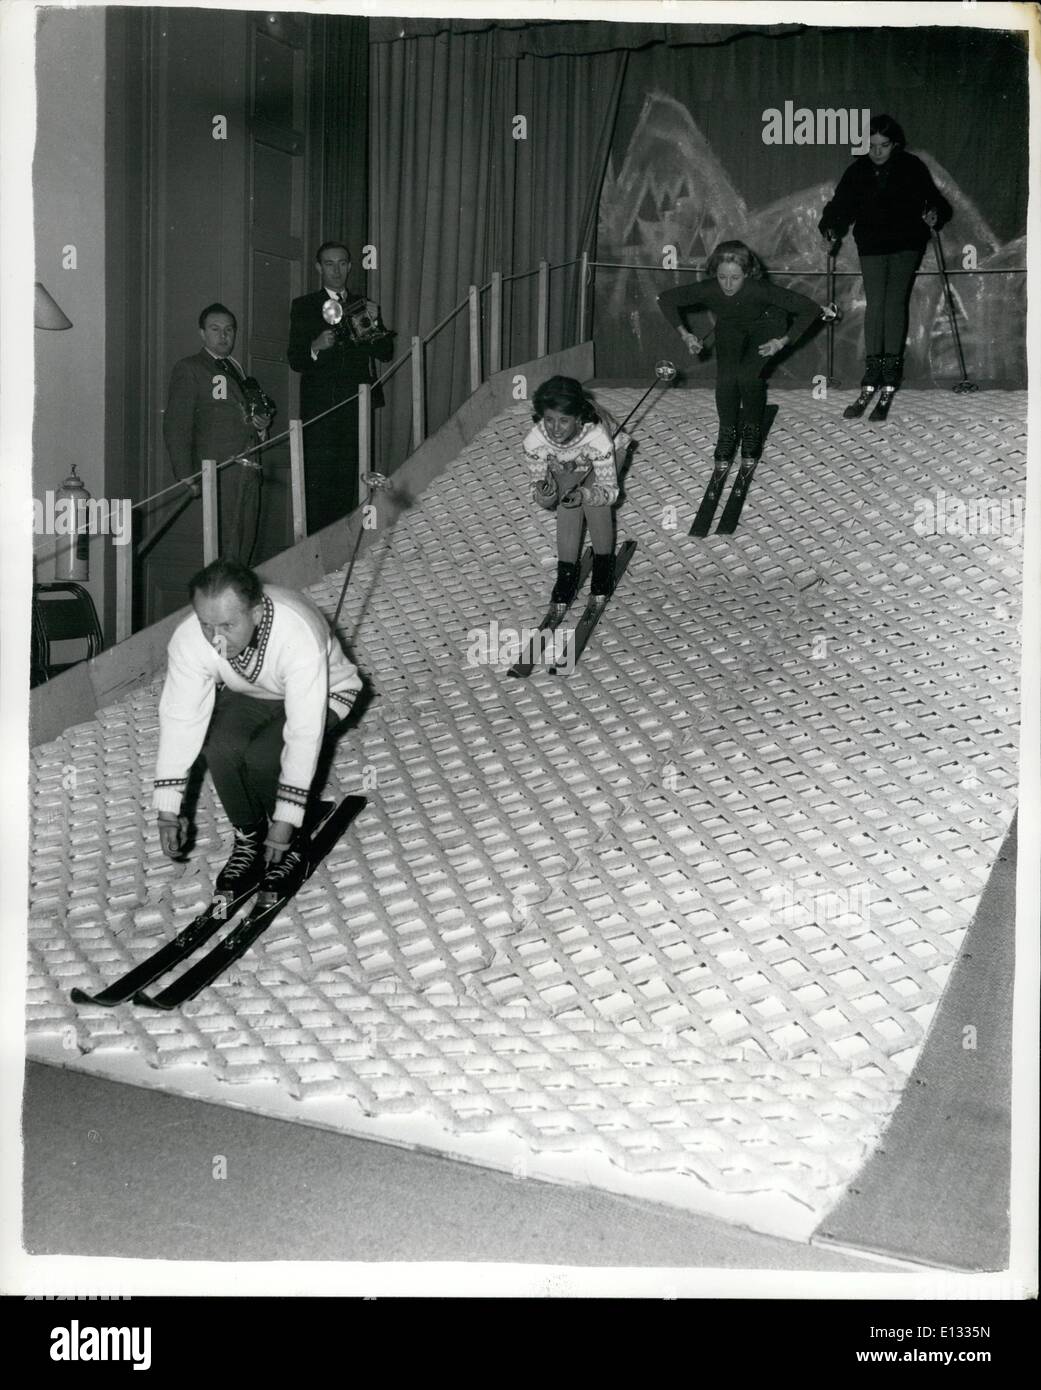 Feb. 26, 2012 - Britain's First Indoor ''Snow Slope'': An Indoor show slope of simulated ''snow'' - (a carpet of fine PVC bristle) - has been constructed by Simpson's of Piccadilly - at the Dry Ski School, Philbeach Hall, Earl's Court. The snow slope will enable beginners to learn the basics of ski-ing without going to a winter resort. Photo shows Four demonstrators - on the new ''snow slope'' this afternoon. They are Left to Right:- Mr. E. Folkman, former Middle East Army Ski Champion; Mlle Stock Photo